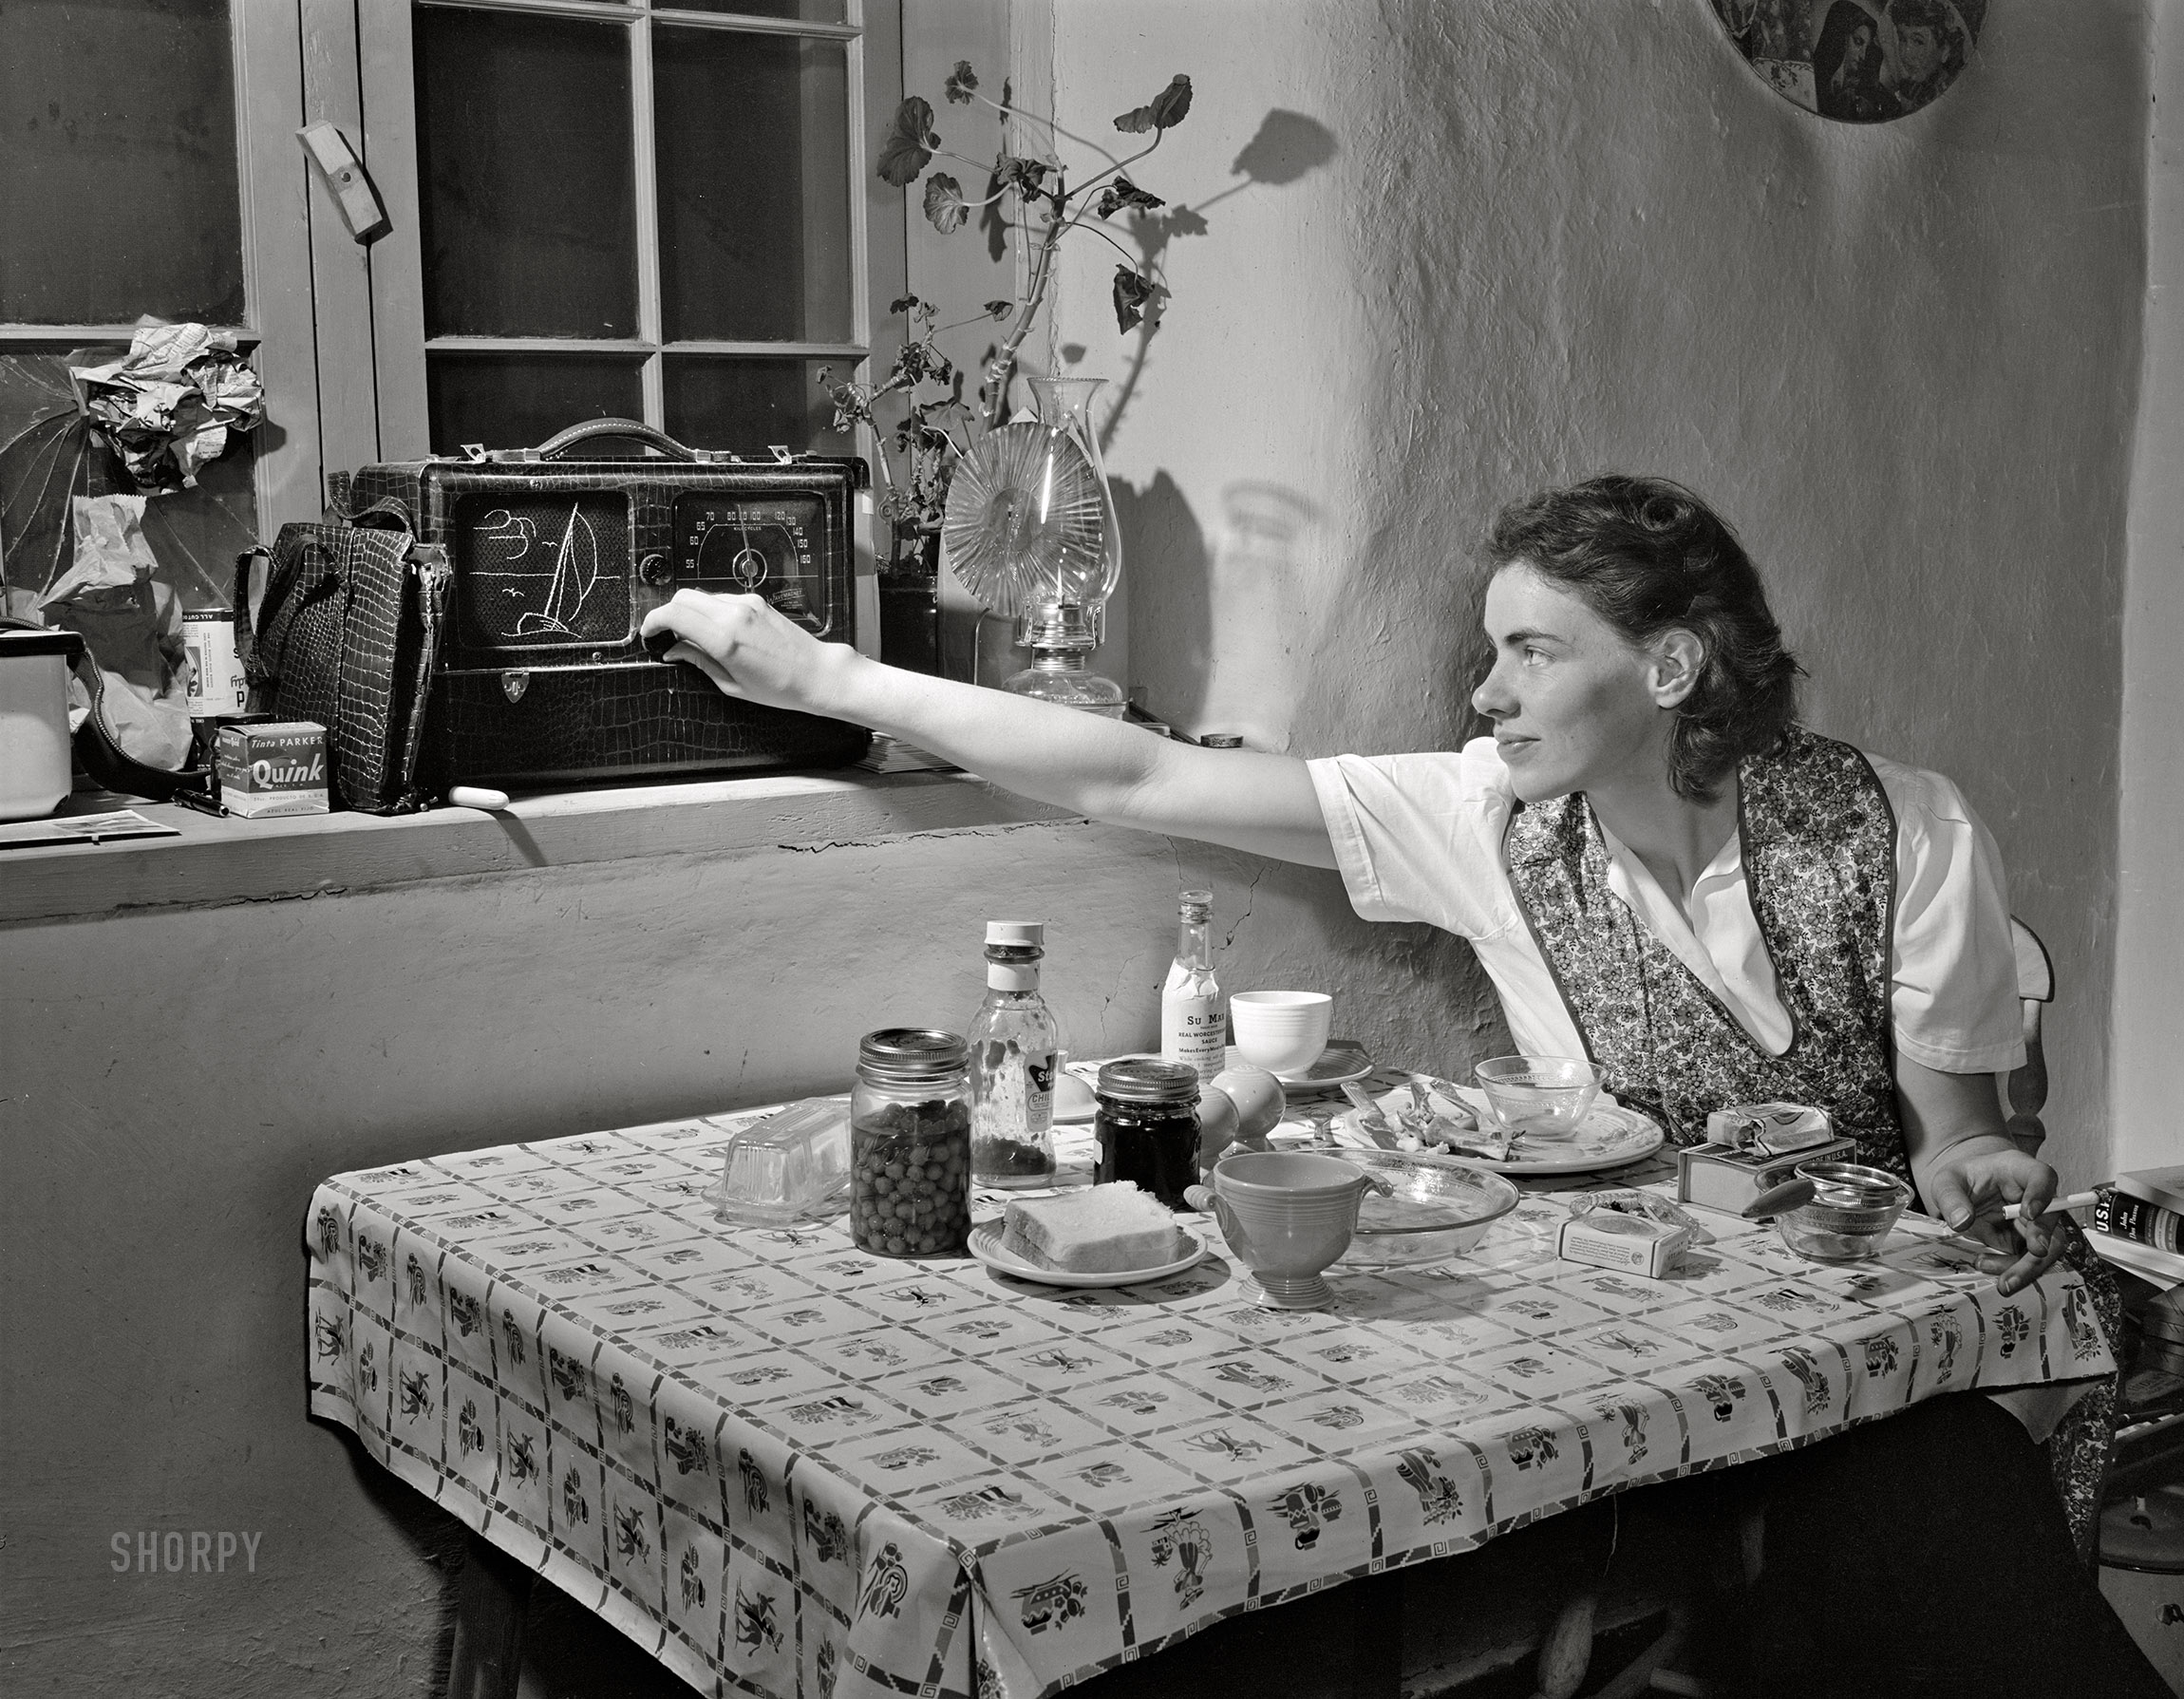 January 1943. Penasco, New Mexico. "Marjorie Mueller, Red Cross nurse at the clinic operated by the Taos County cooperative health association. The radio is her only contact with the outside world. Papers come rarely to the town, and she must depend on news broadcasts to follow daily events." Acetate negative by John Collier,  Office of War Information. View full size.